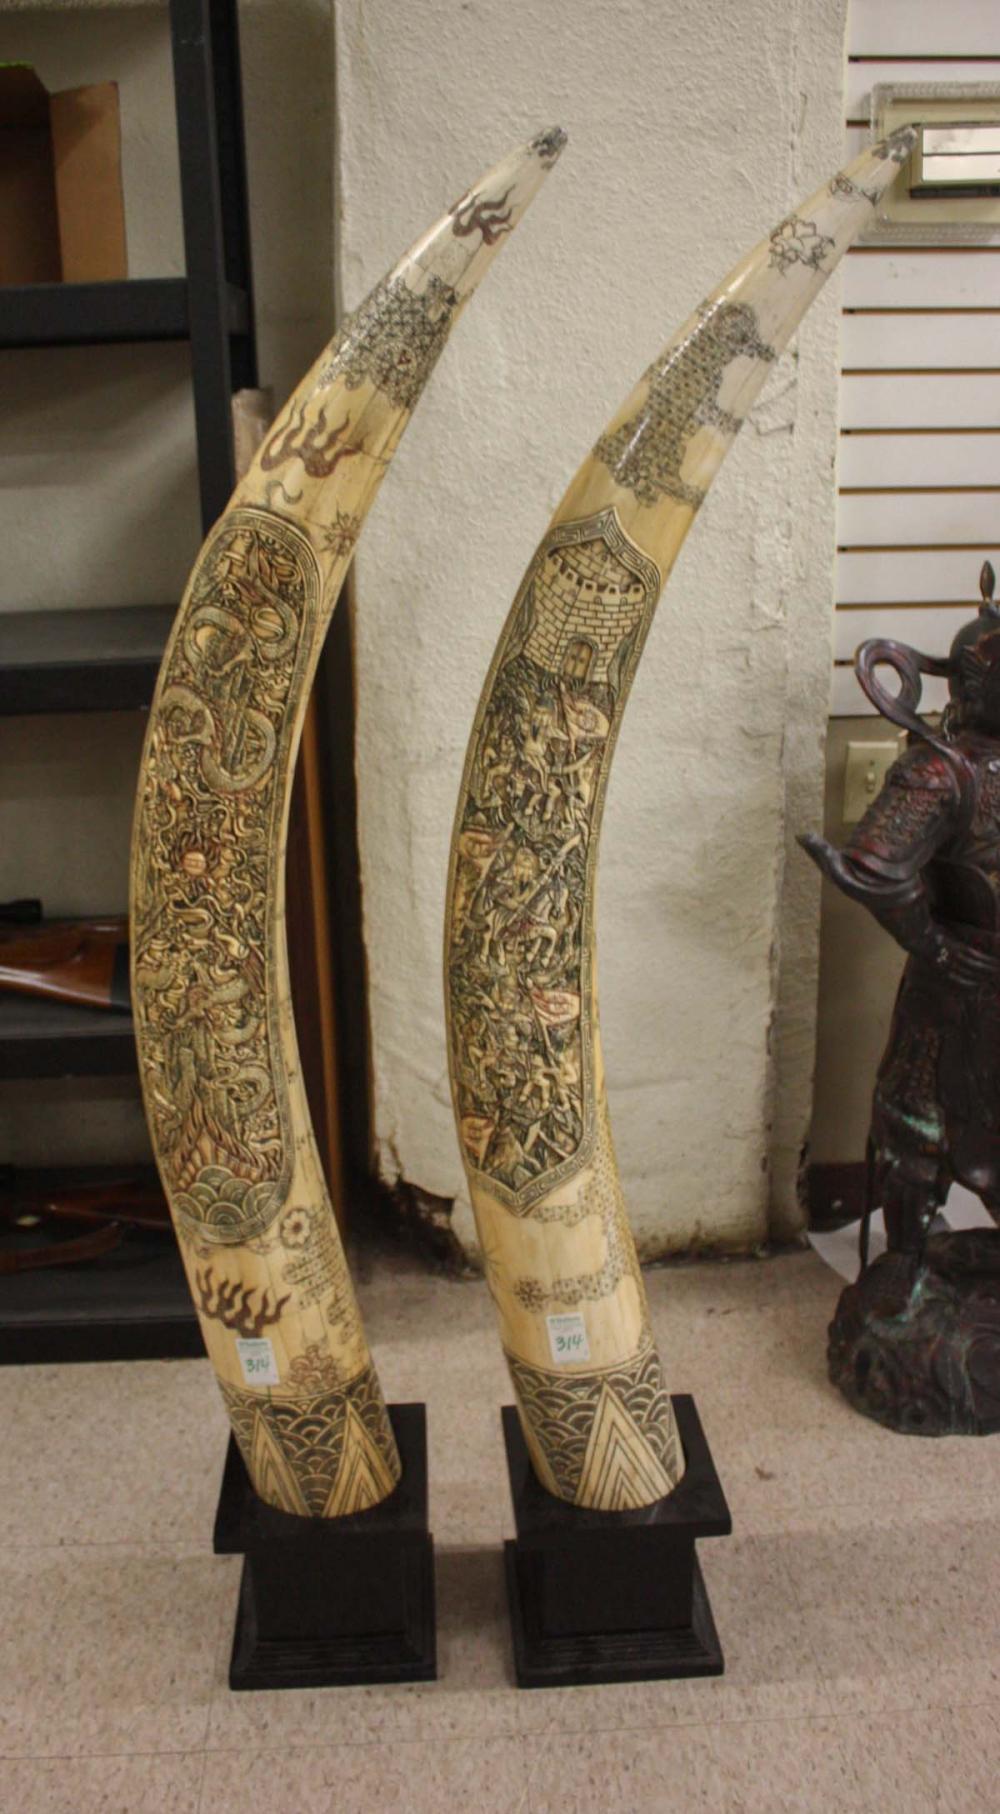 LARGE PAIR OF SCRIMSHAW DECORATED 33e25a